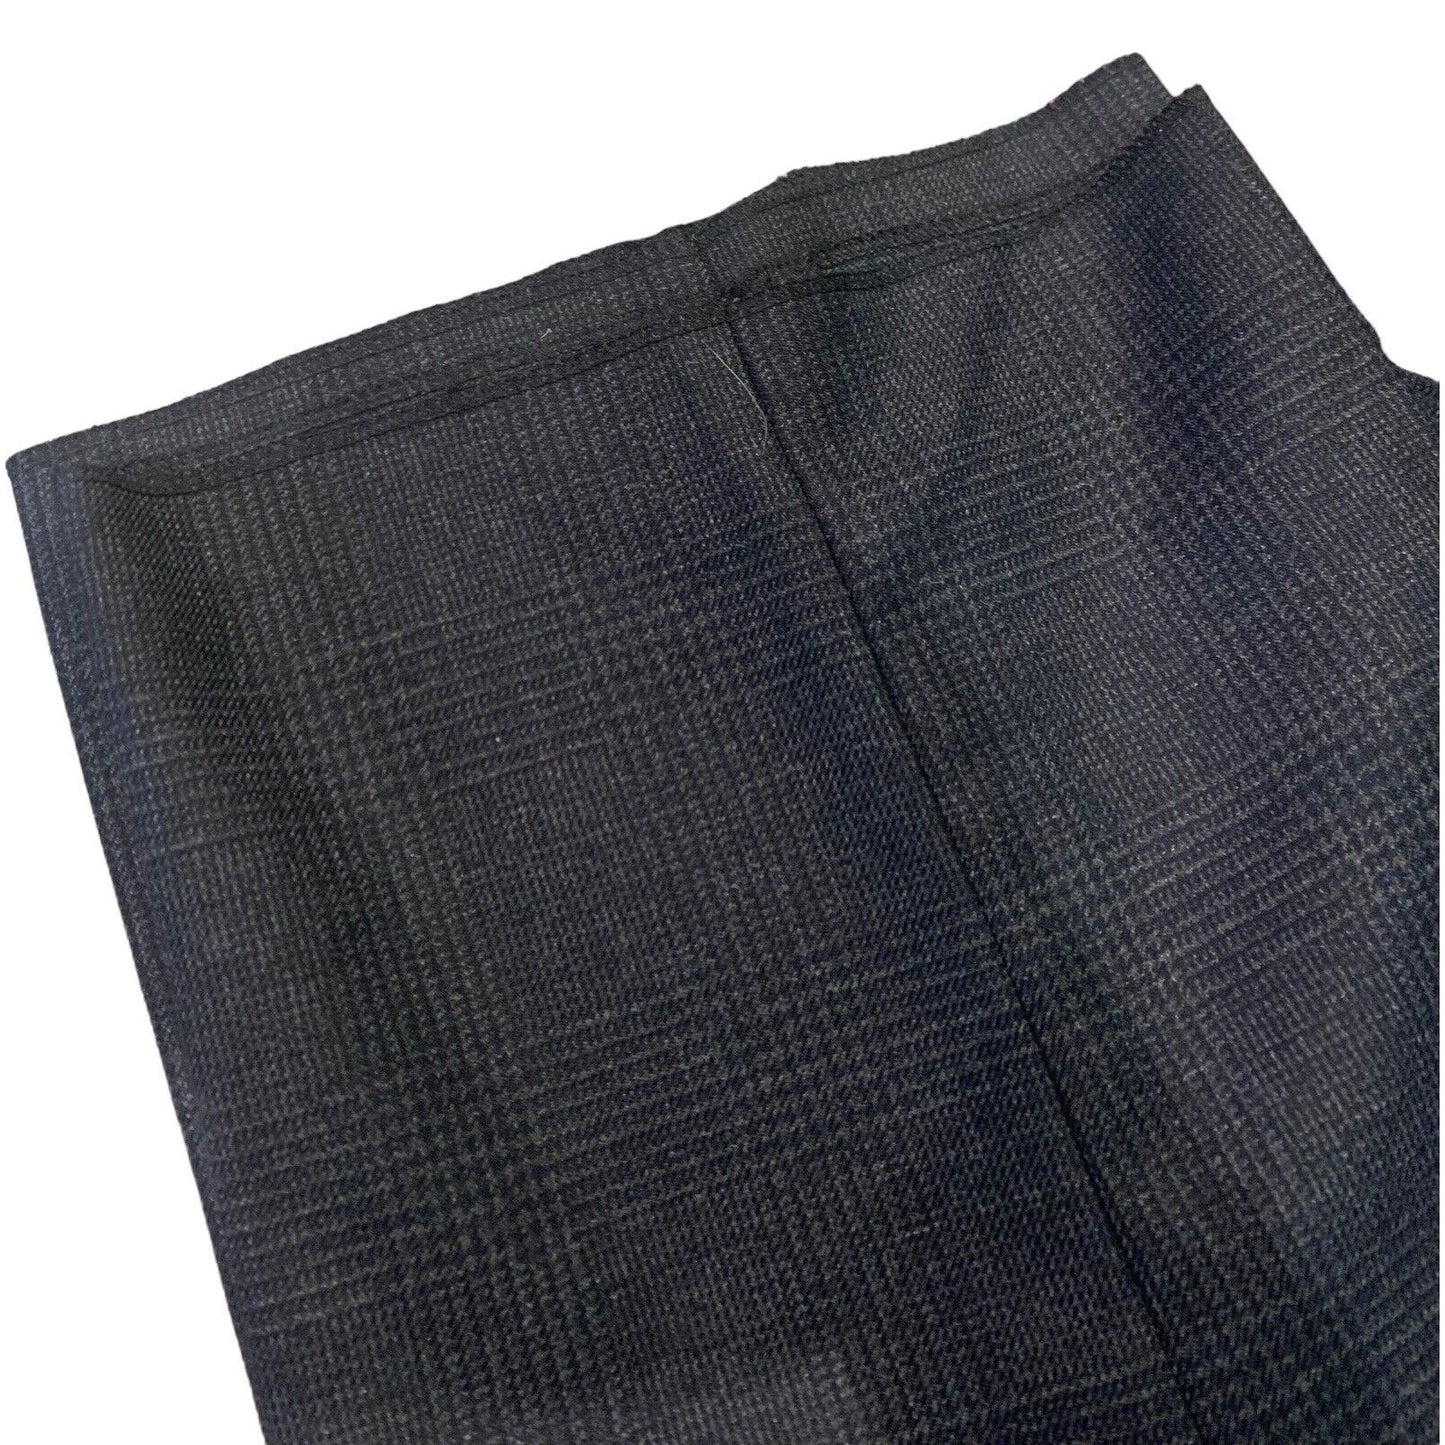 Hermes Men's Wool & Mohair Blend Ghost Plaid Pants with Leather Accents